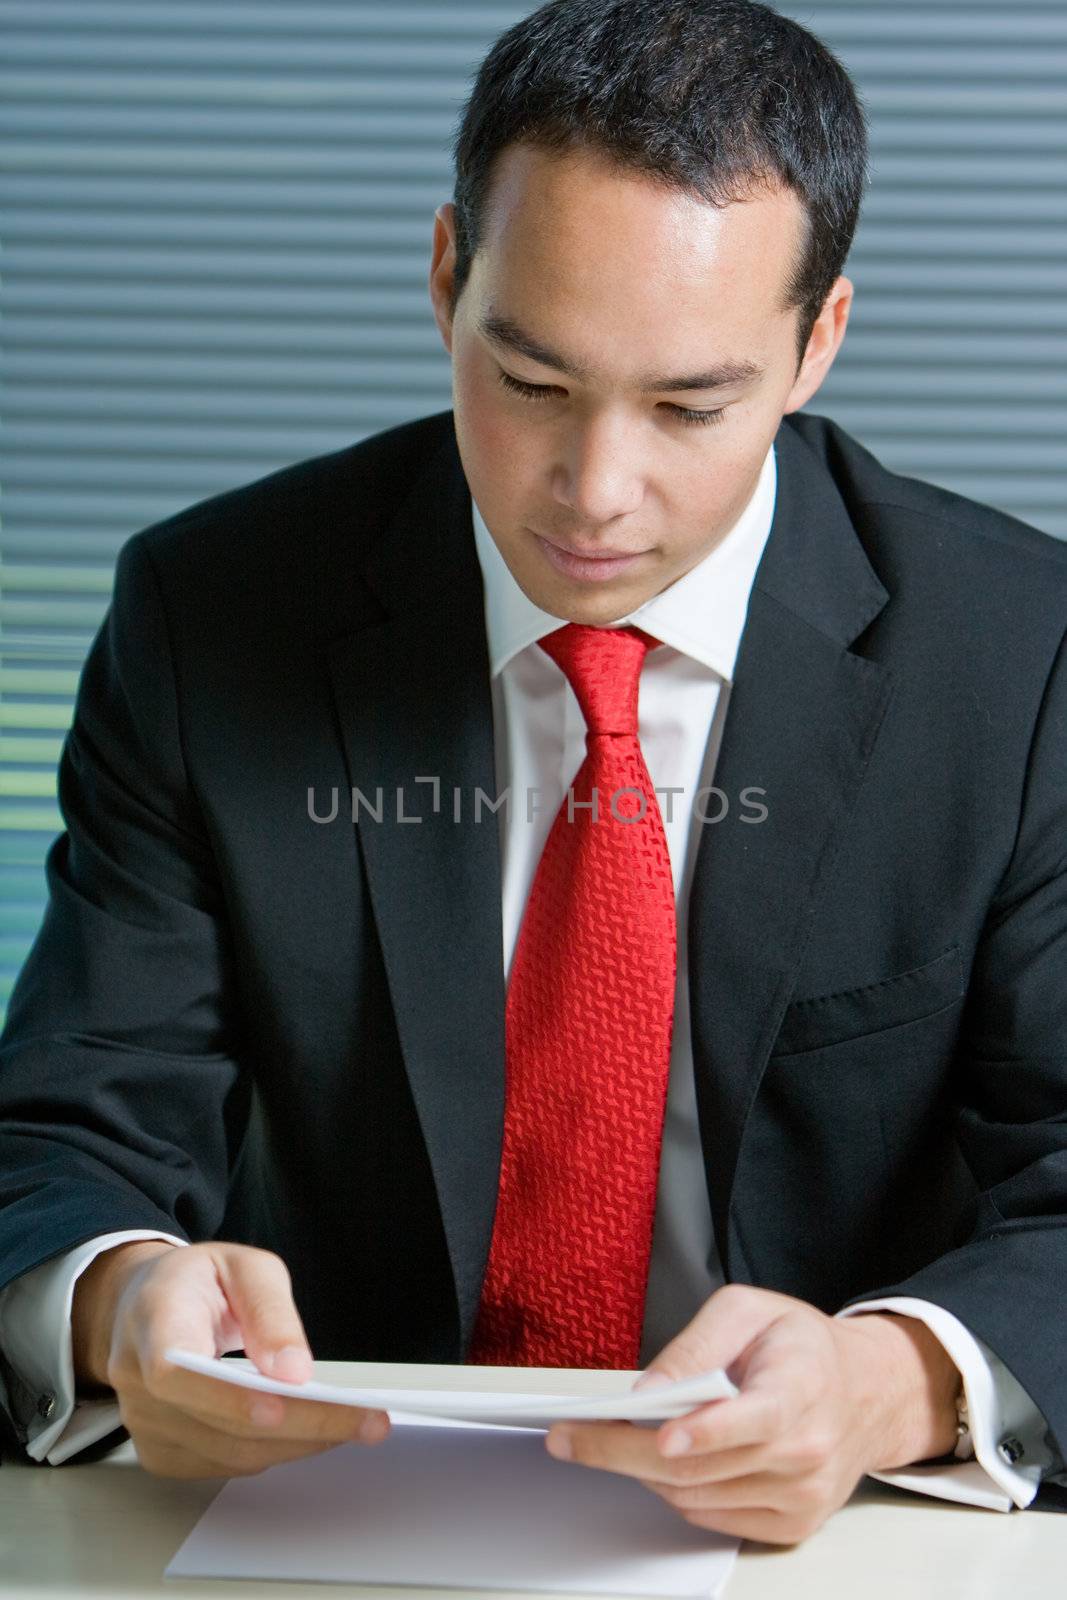 Smart eurasian business man in formal attire working and browsing with documents